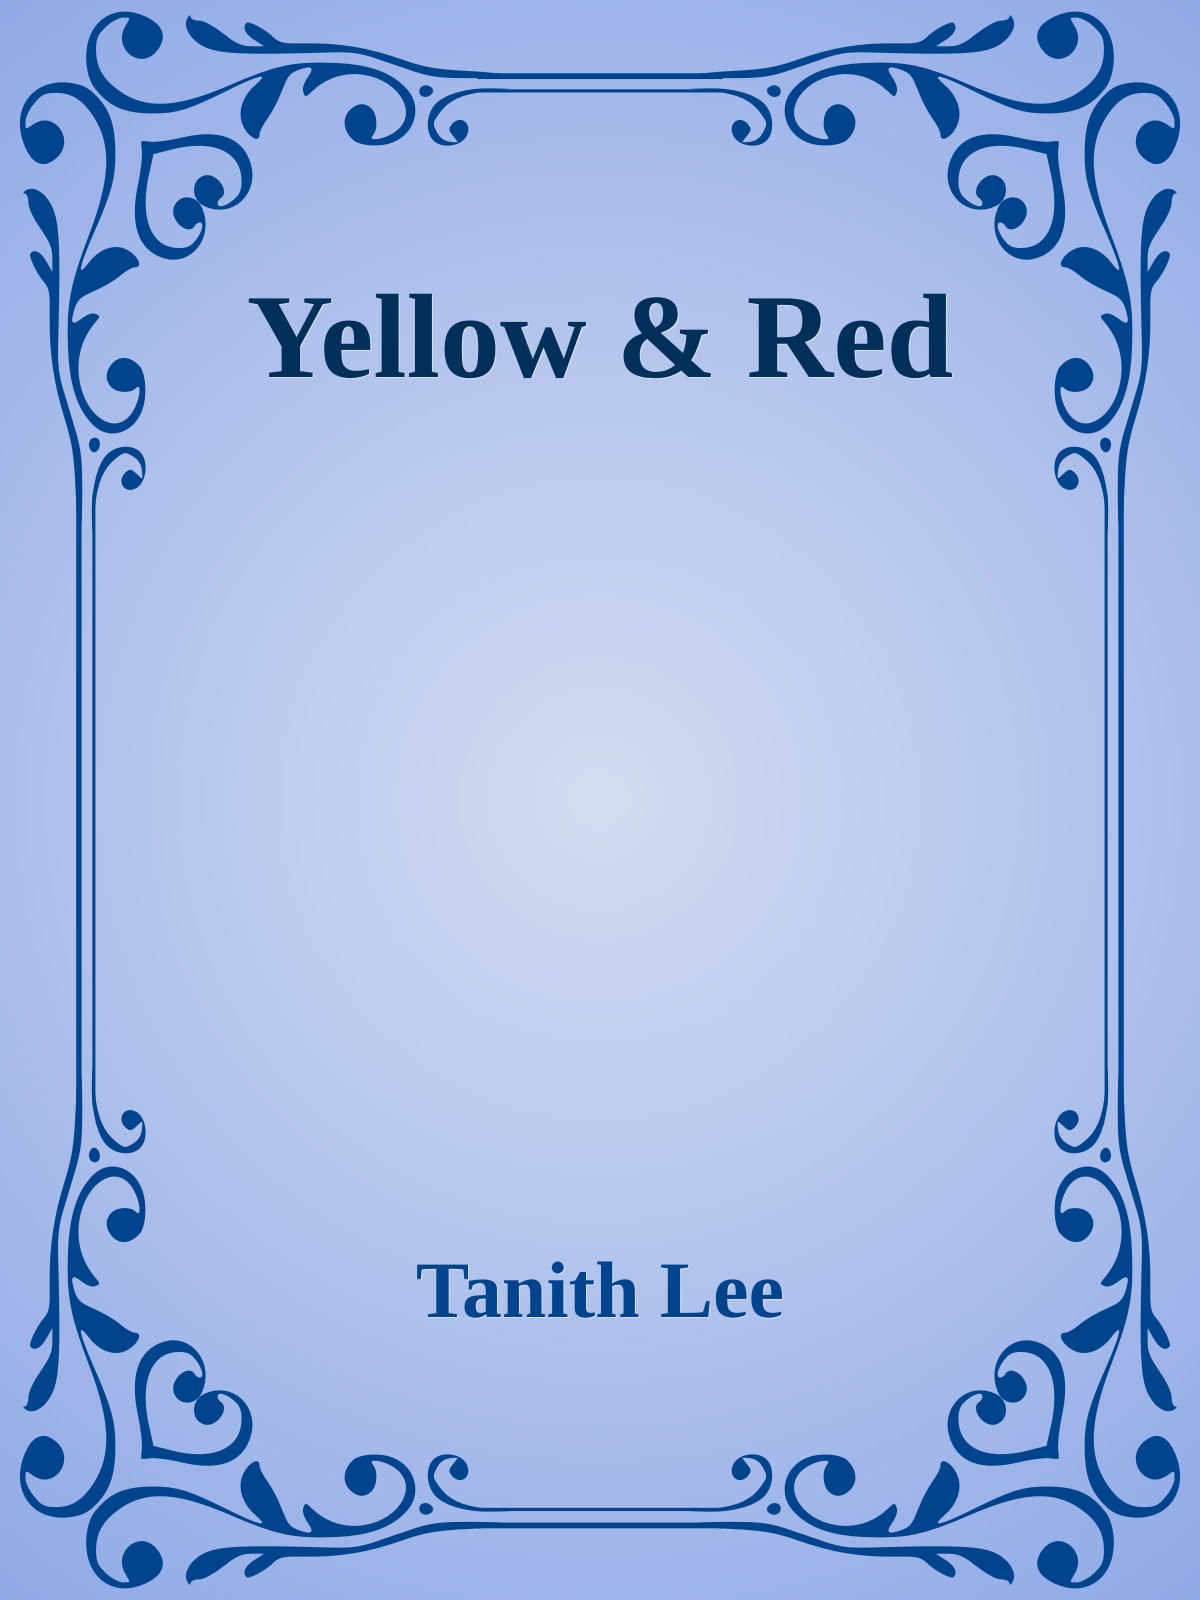 Yellow & Red